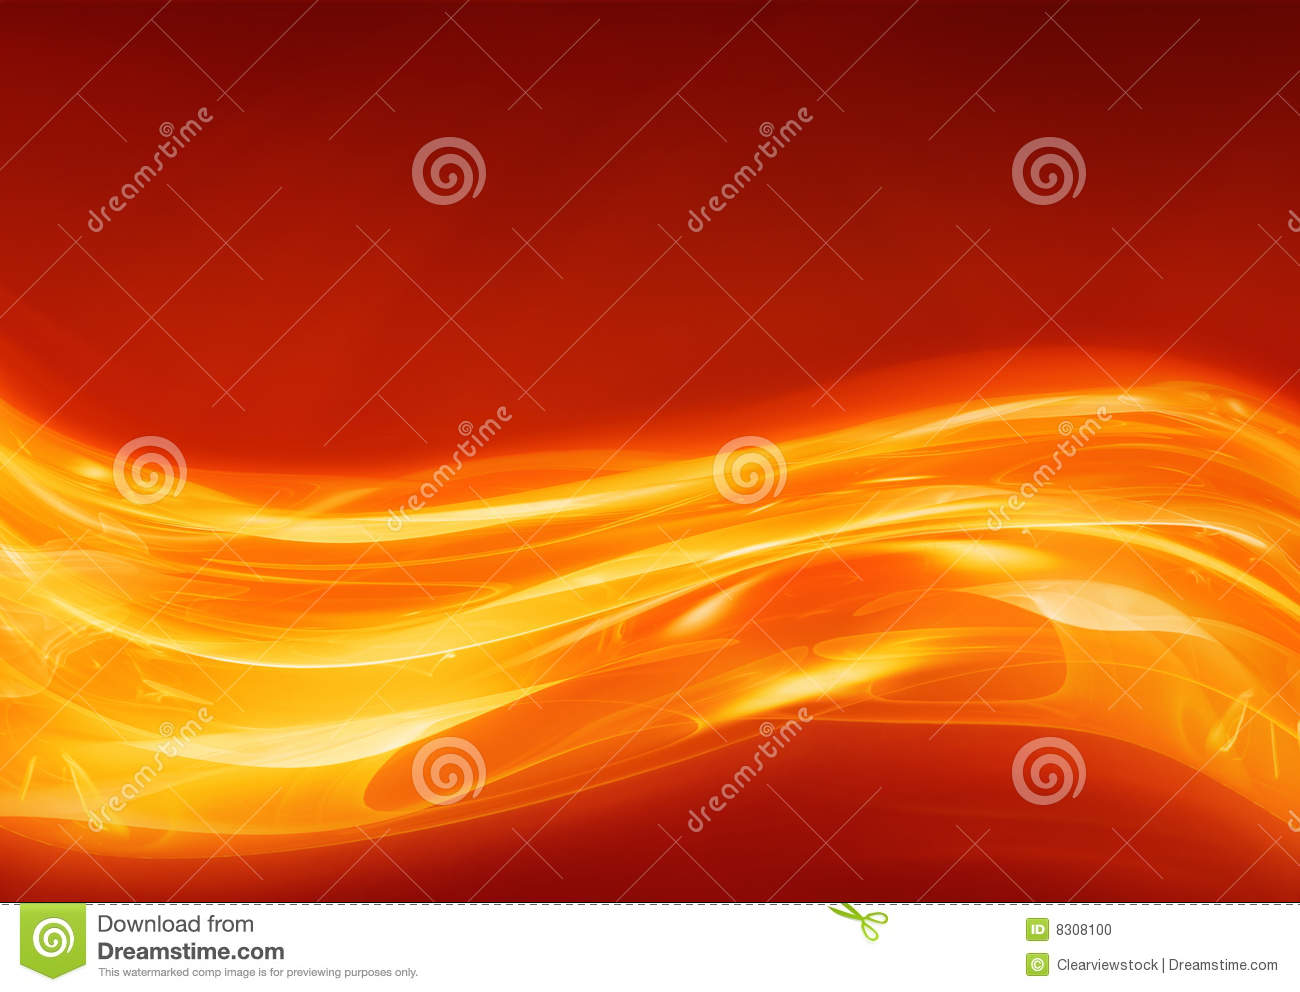 Lava Flow Clipart Flowing Heat Or Lava Abstract